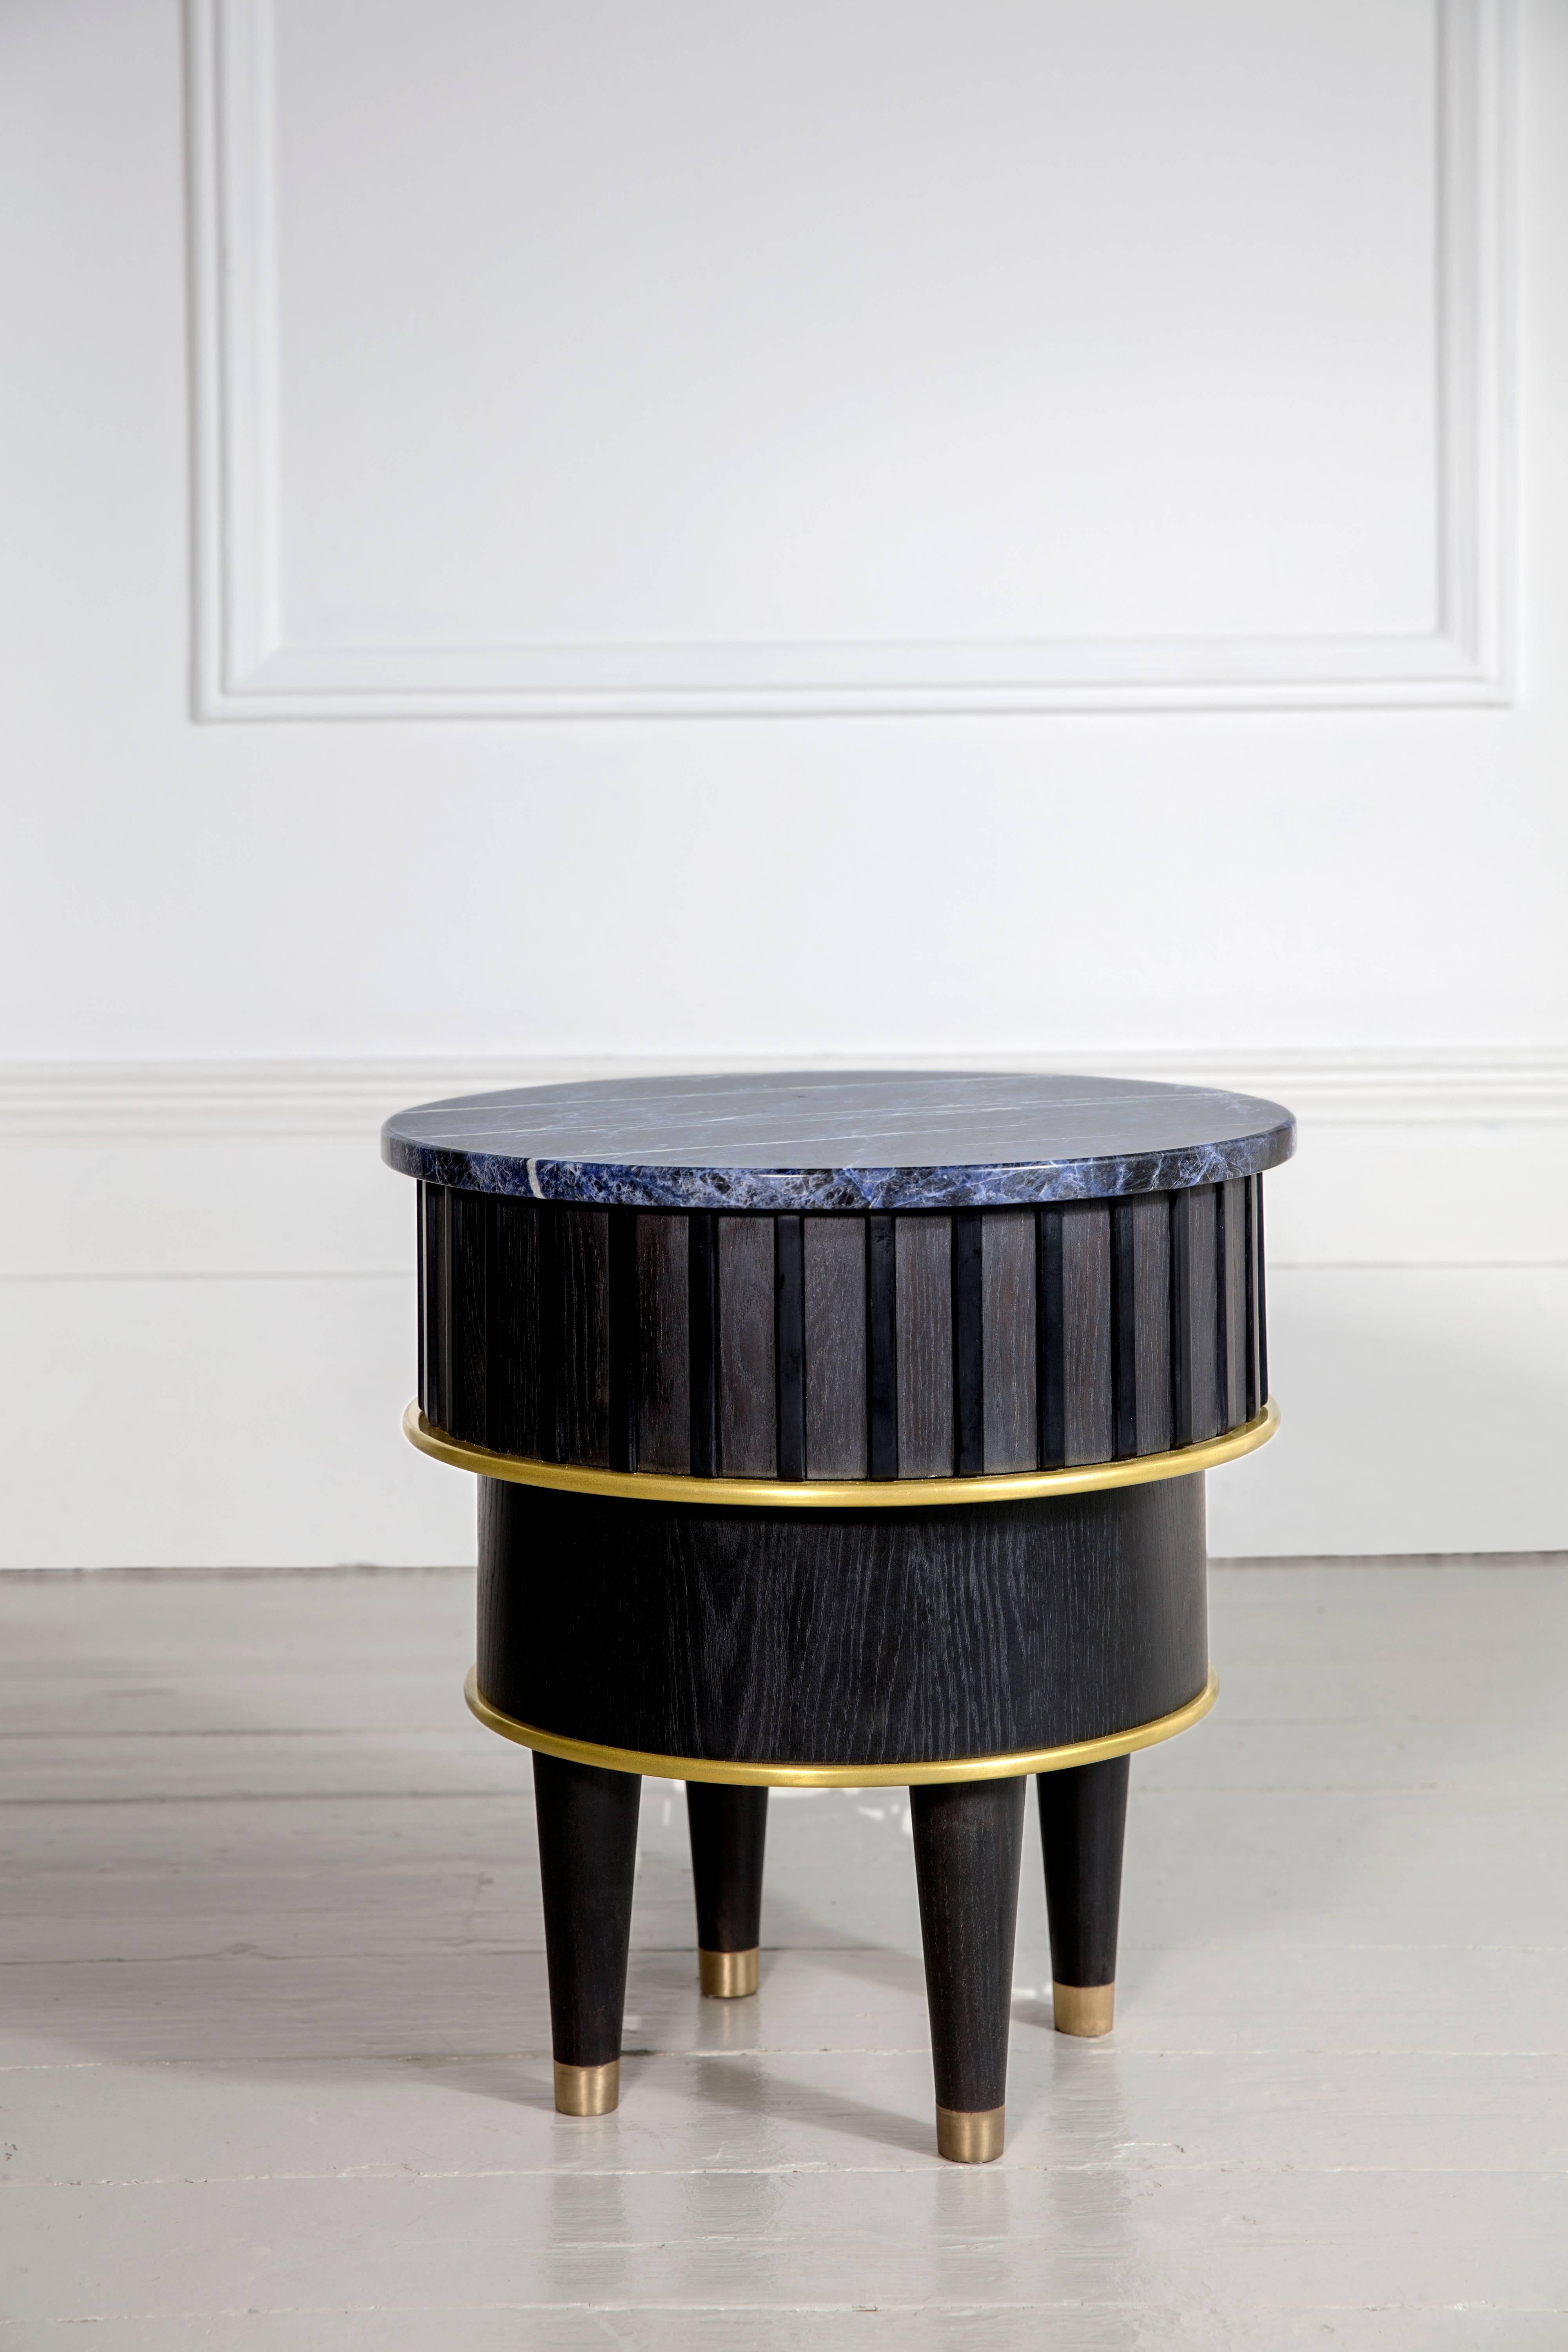 A beautiful Corian and sodalite top paired with blackened oak and liquid brass. This blackened oak table includes solid brass socks. Black Corian and liquid brass accents, crowned with a semi precious sodalite stone top.
This side table evokes a